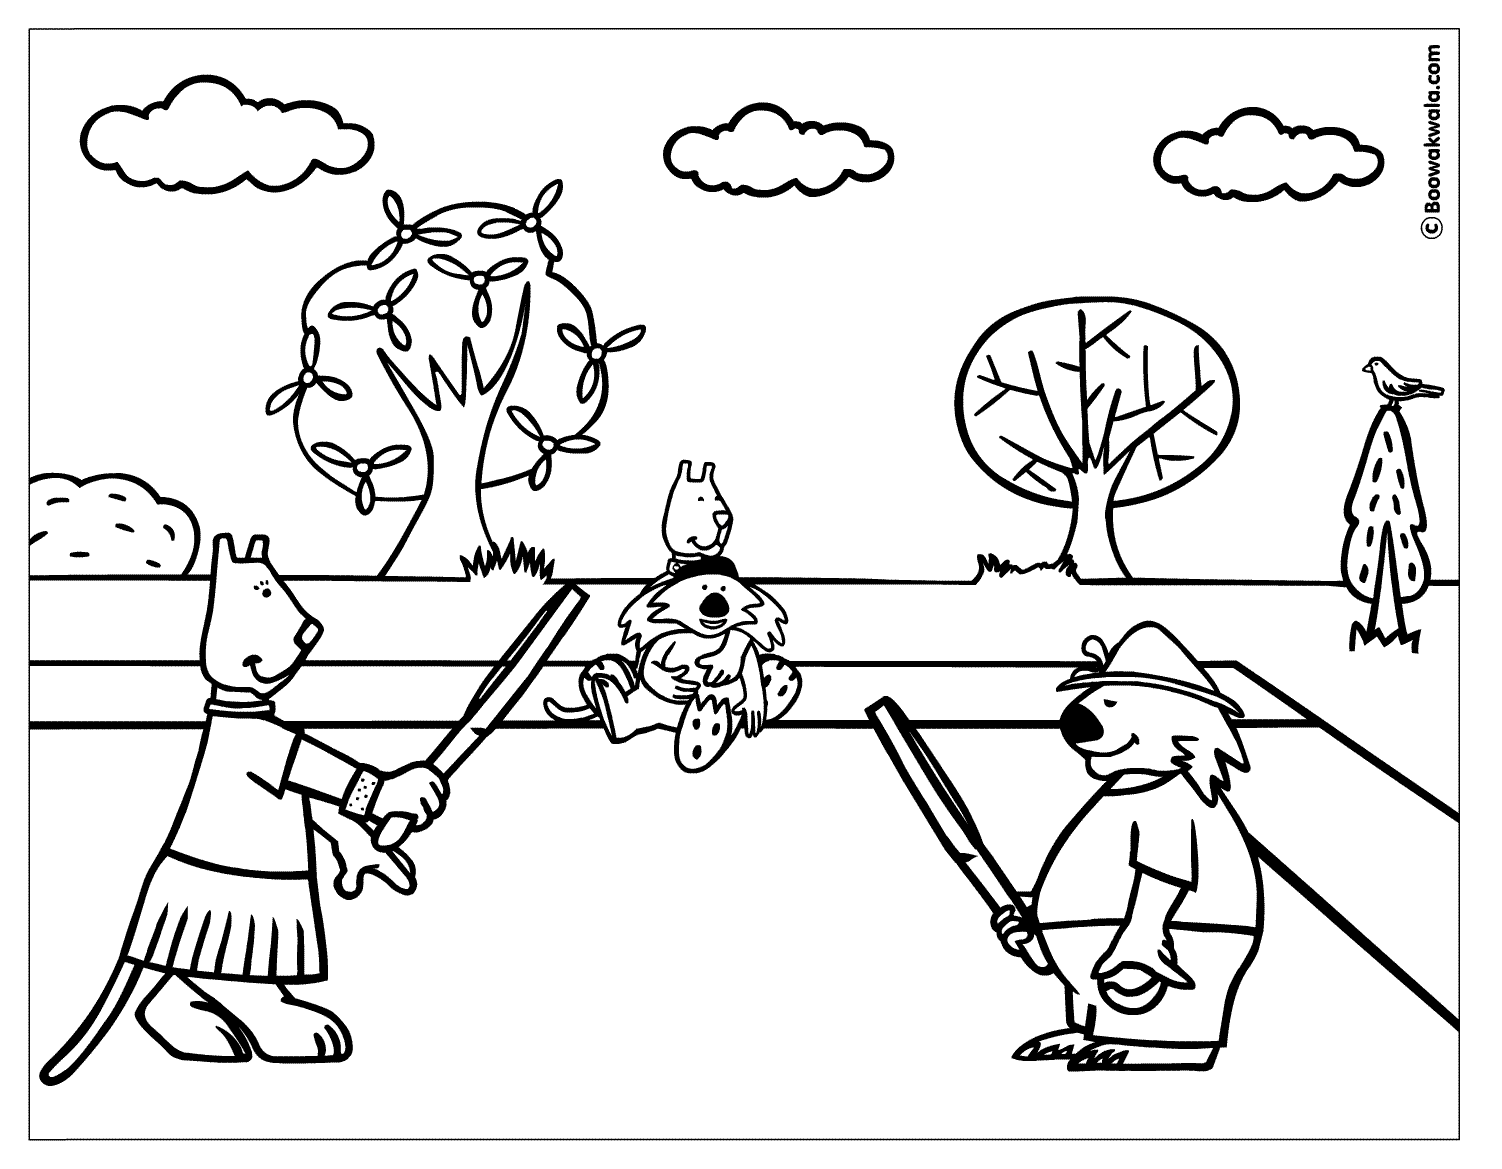 Coloring pages : Coloring Pages for Children